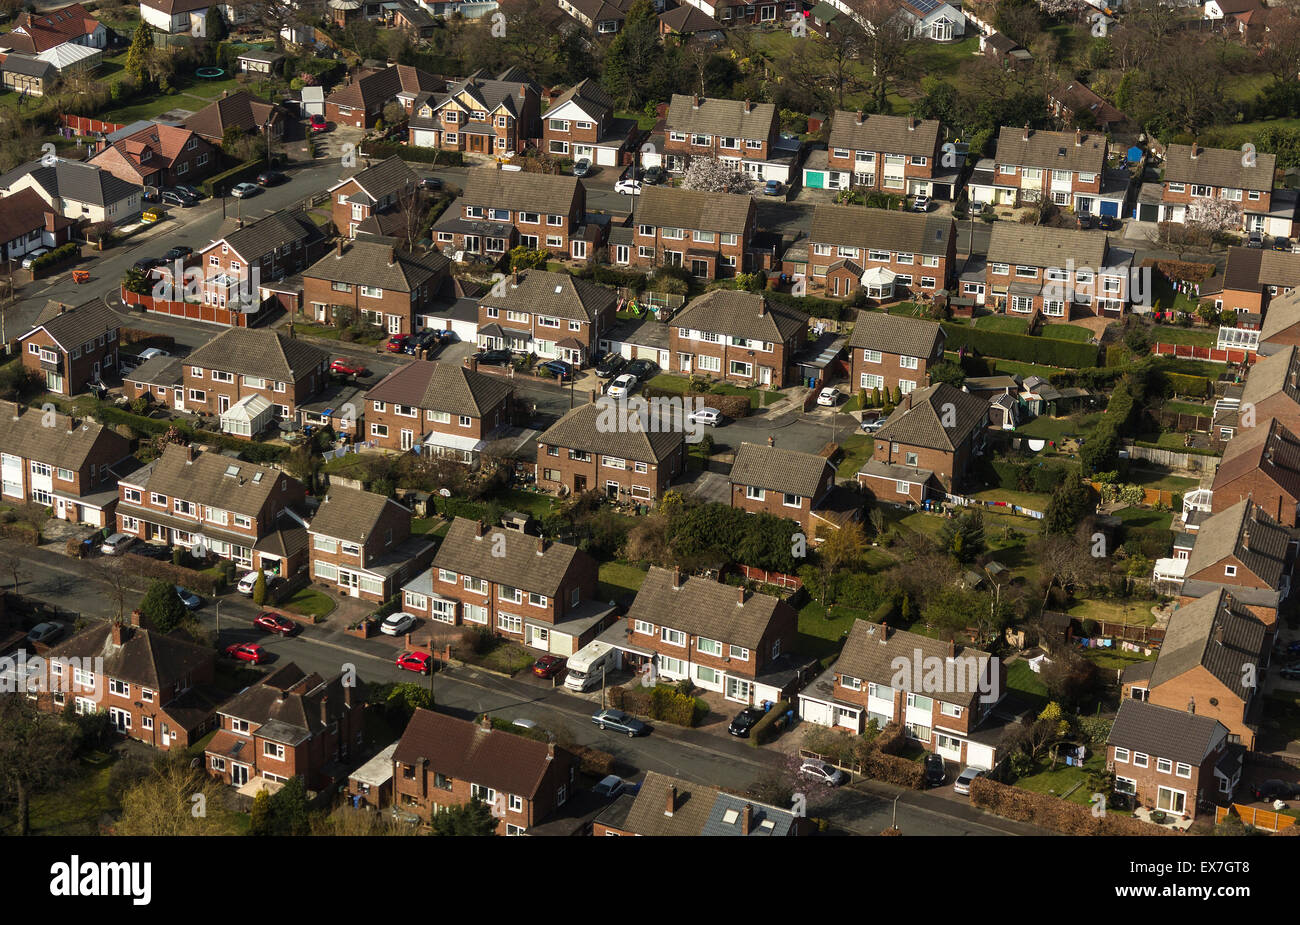 Aerial view of housing estate Stock Photo